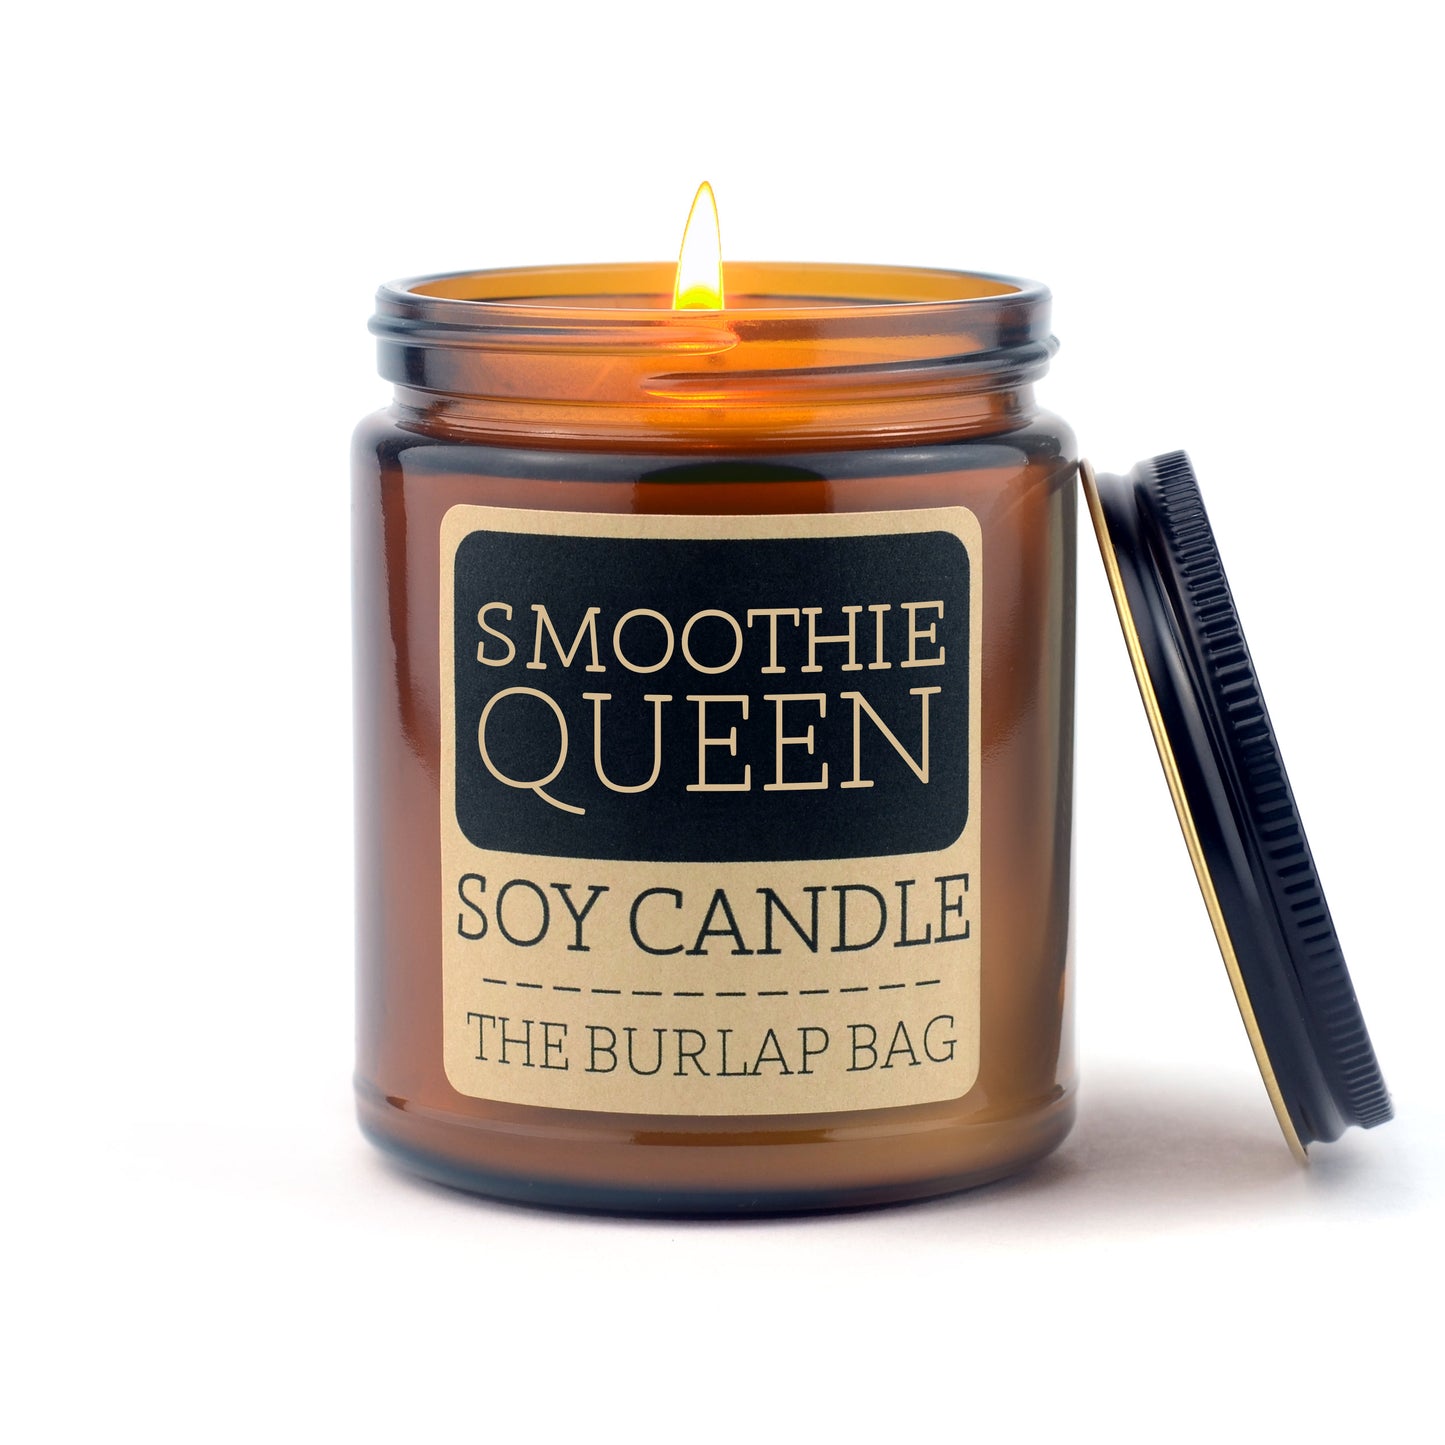 Smoothie Queen - Soy Candle 9oz